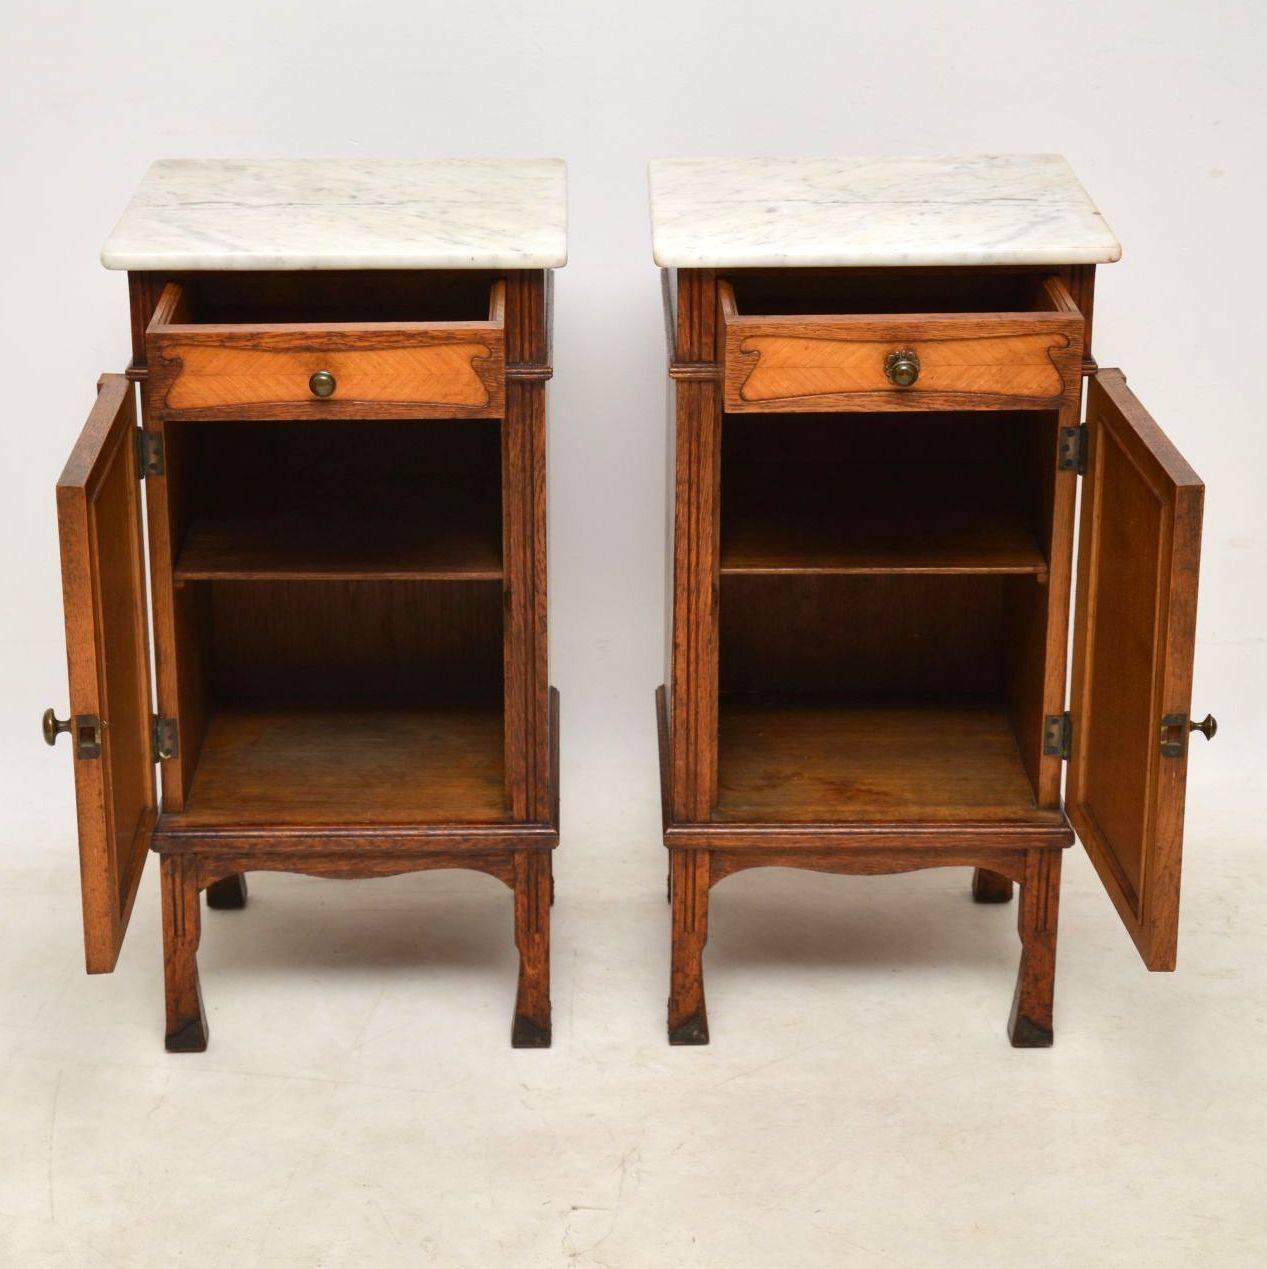 Pair of antique French marble-top bedside cabinet in oak with walnut inset panels. They are in good original condition & date from around the 1890 period. The marble tops are in good condition & original to the cabinets. The brass handles look